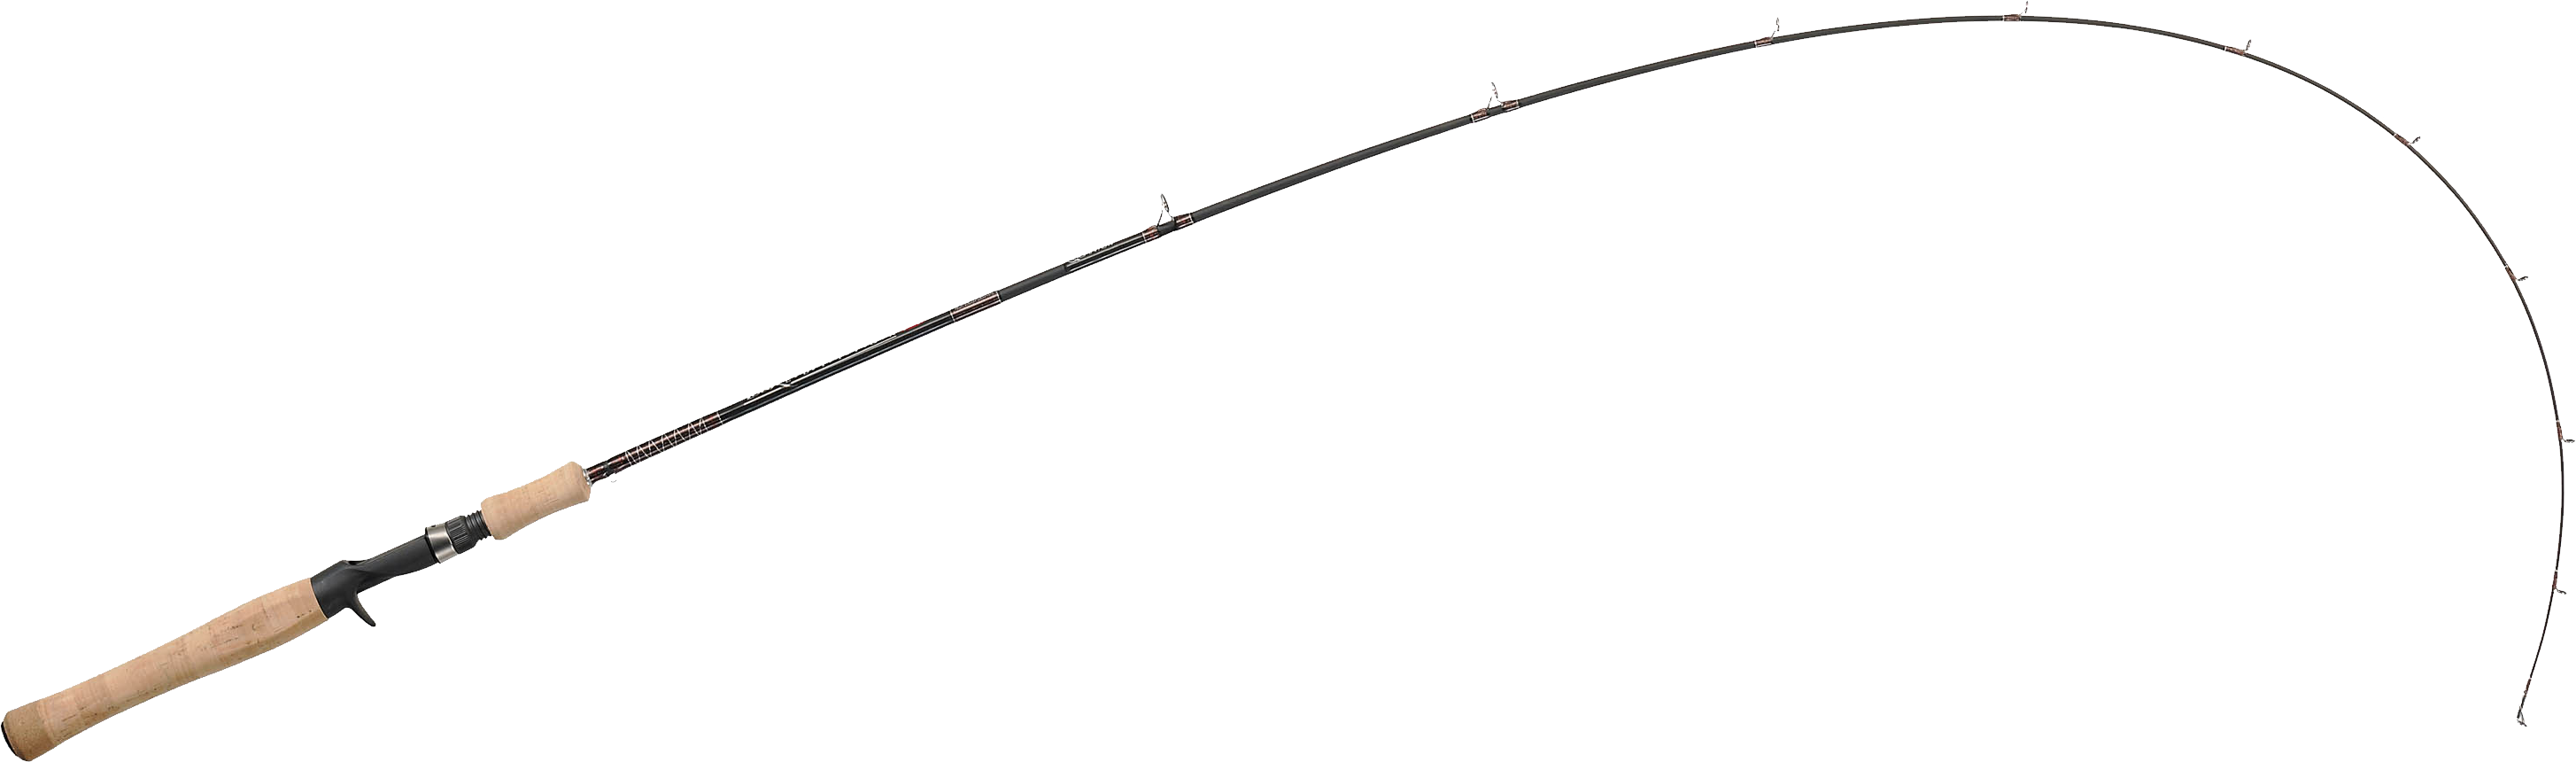 Fishing Pole Png Clipart PNG Image